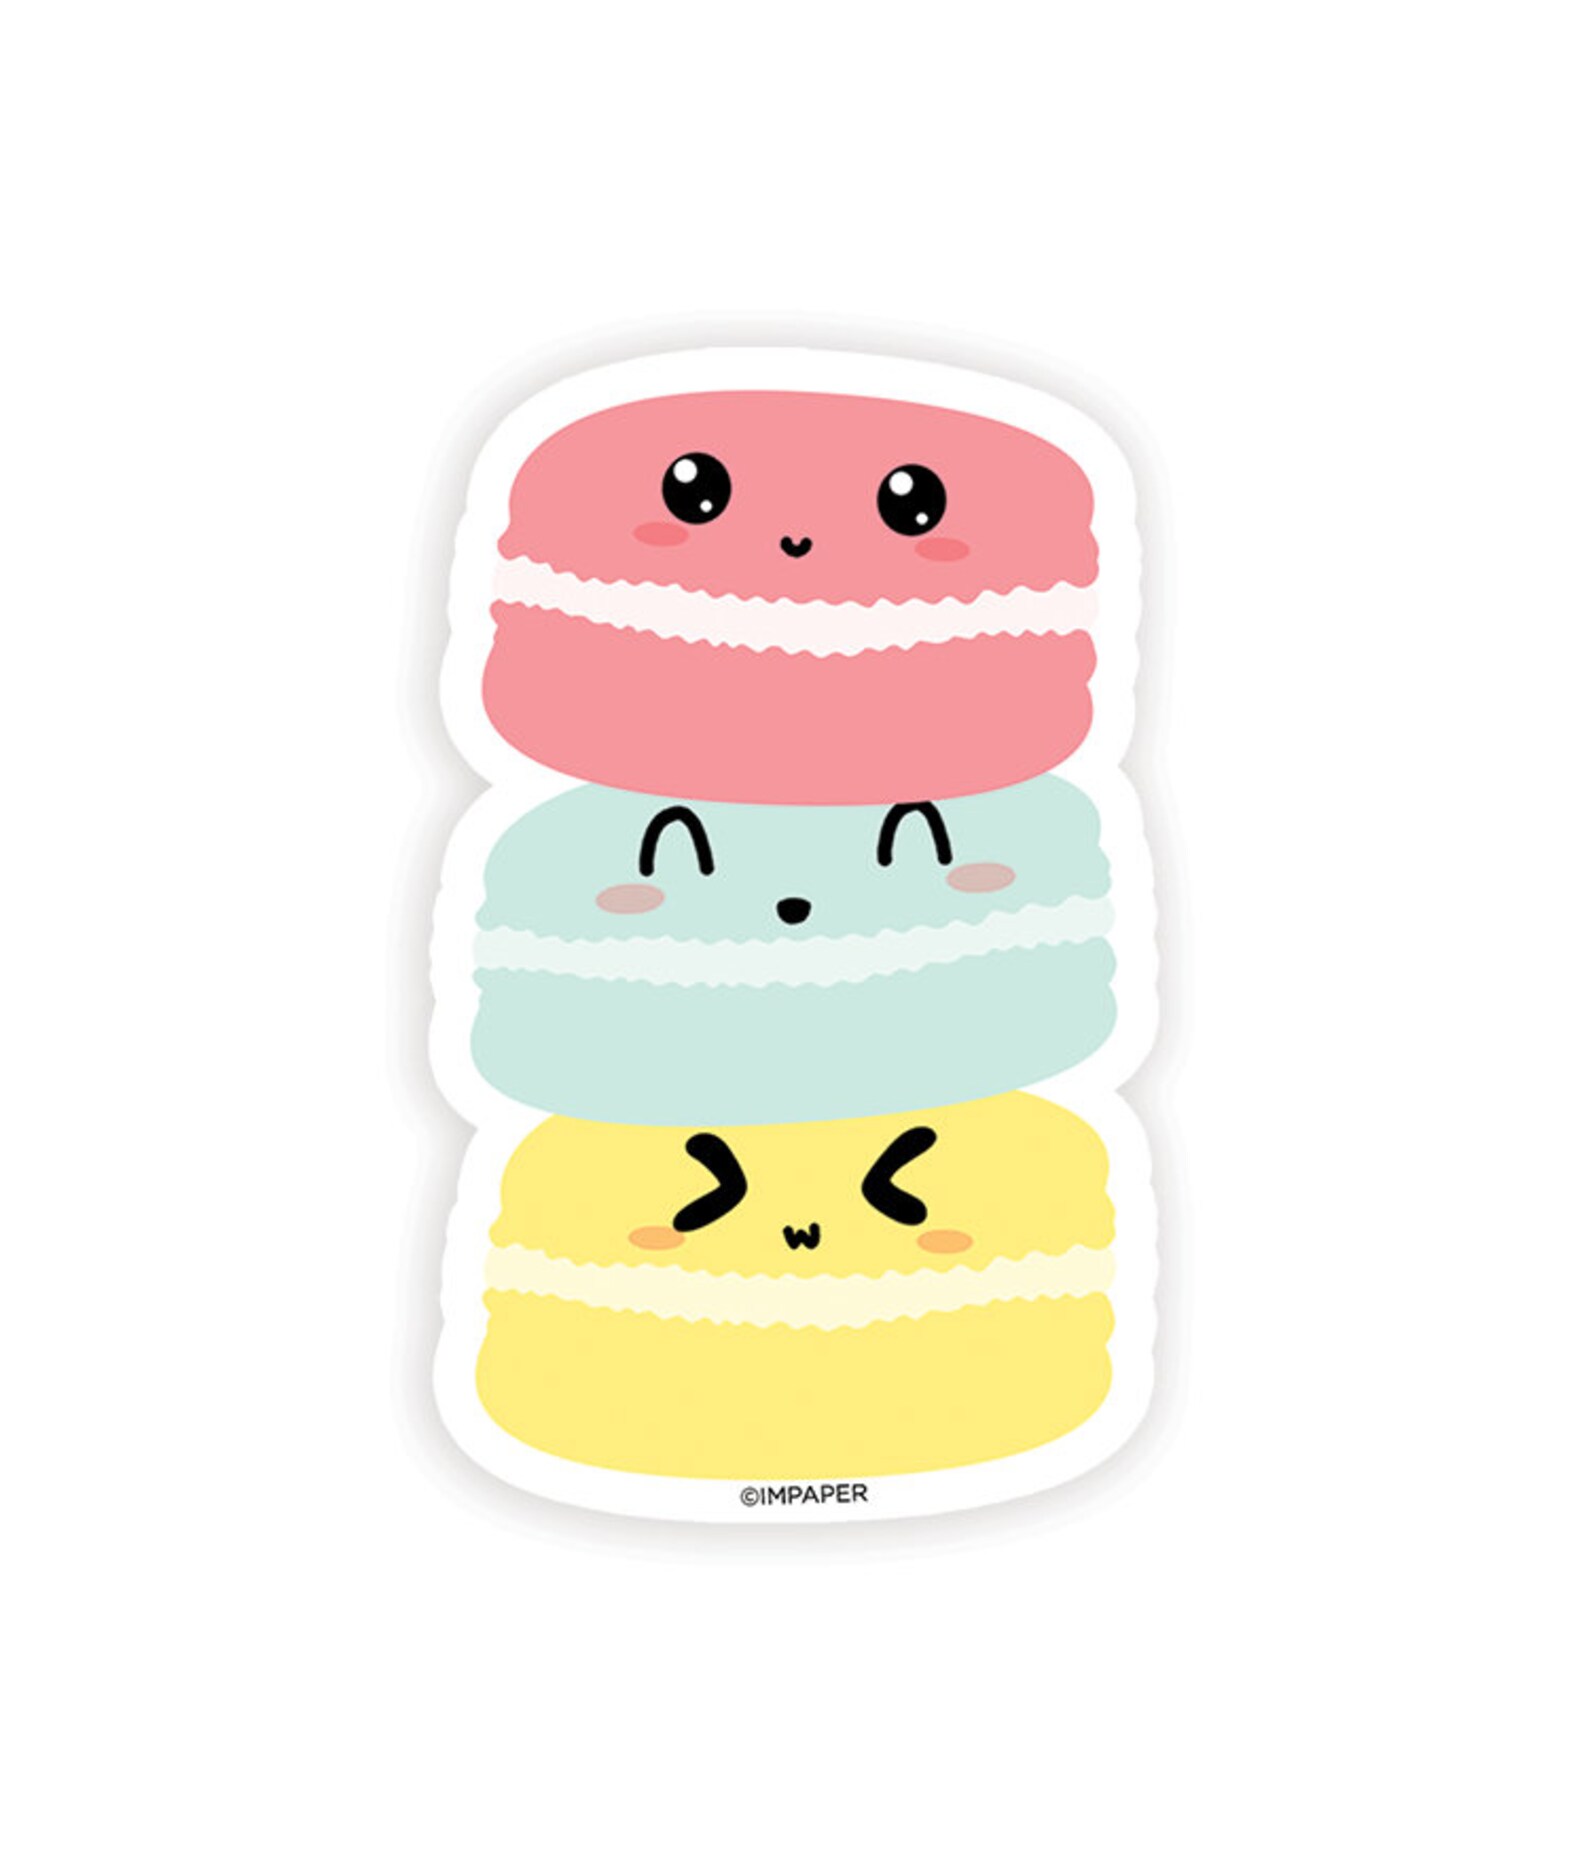 Macaron Sticker Foodie Stickers for Friends Cute Stickers - Etsy